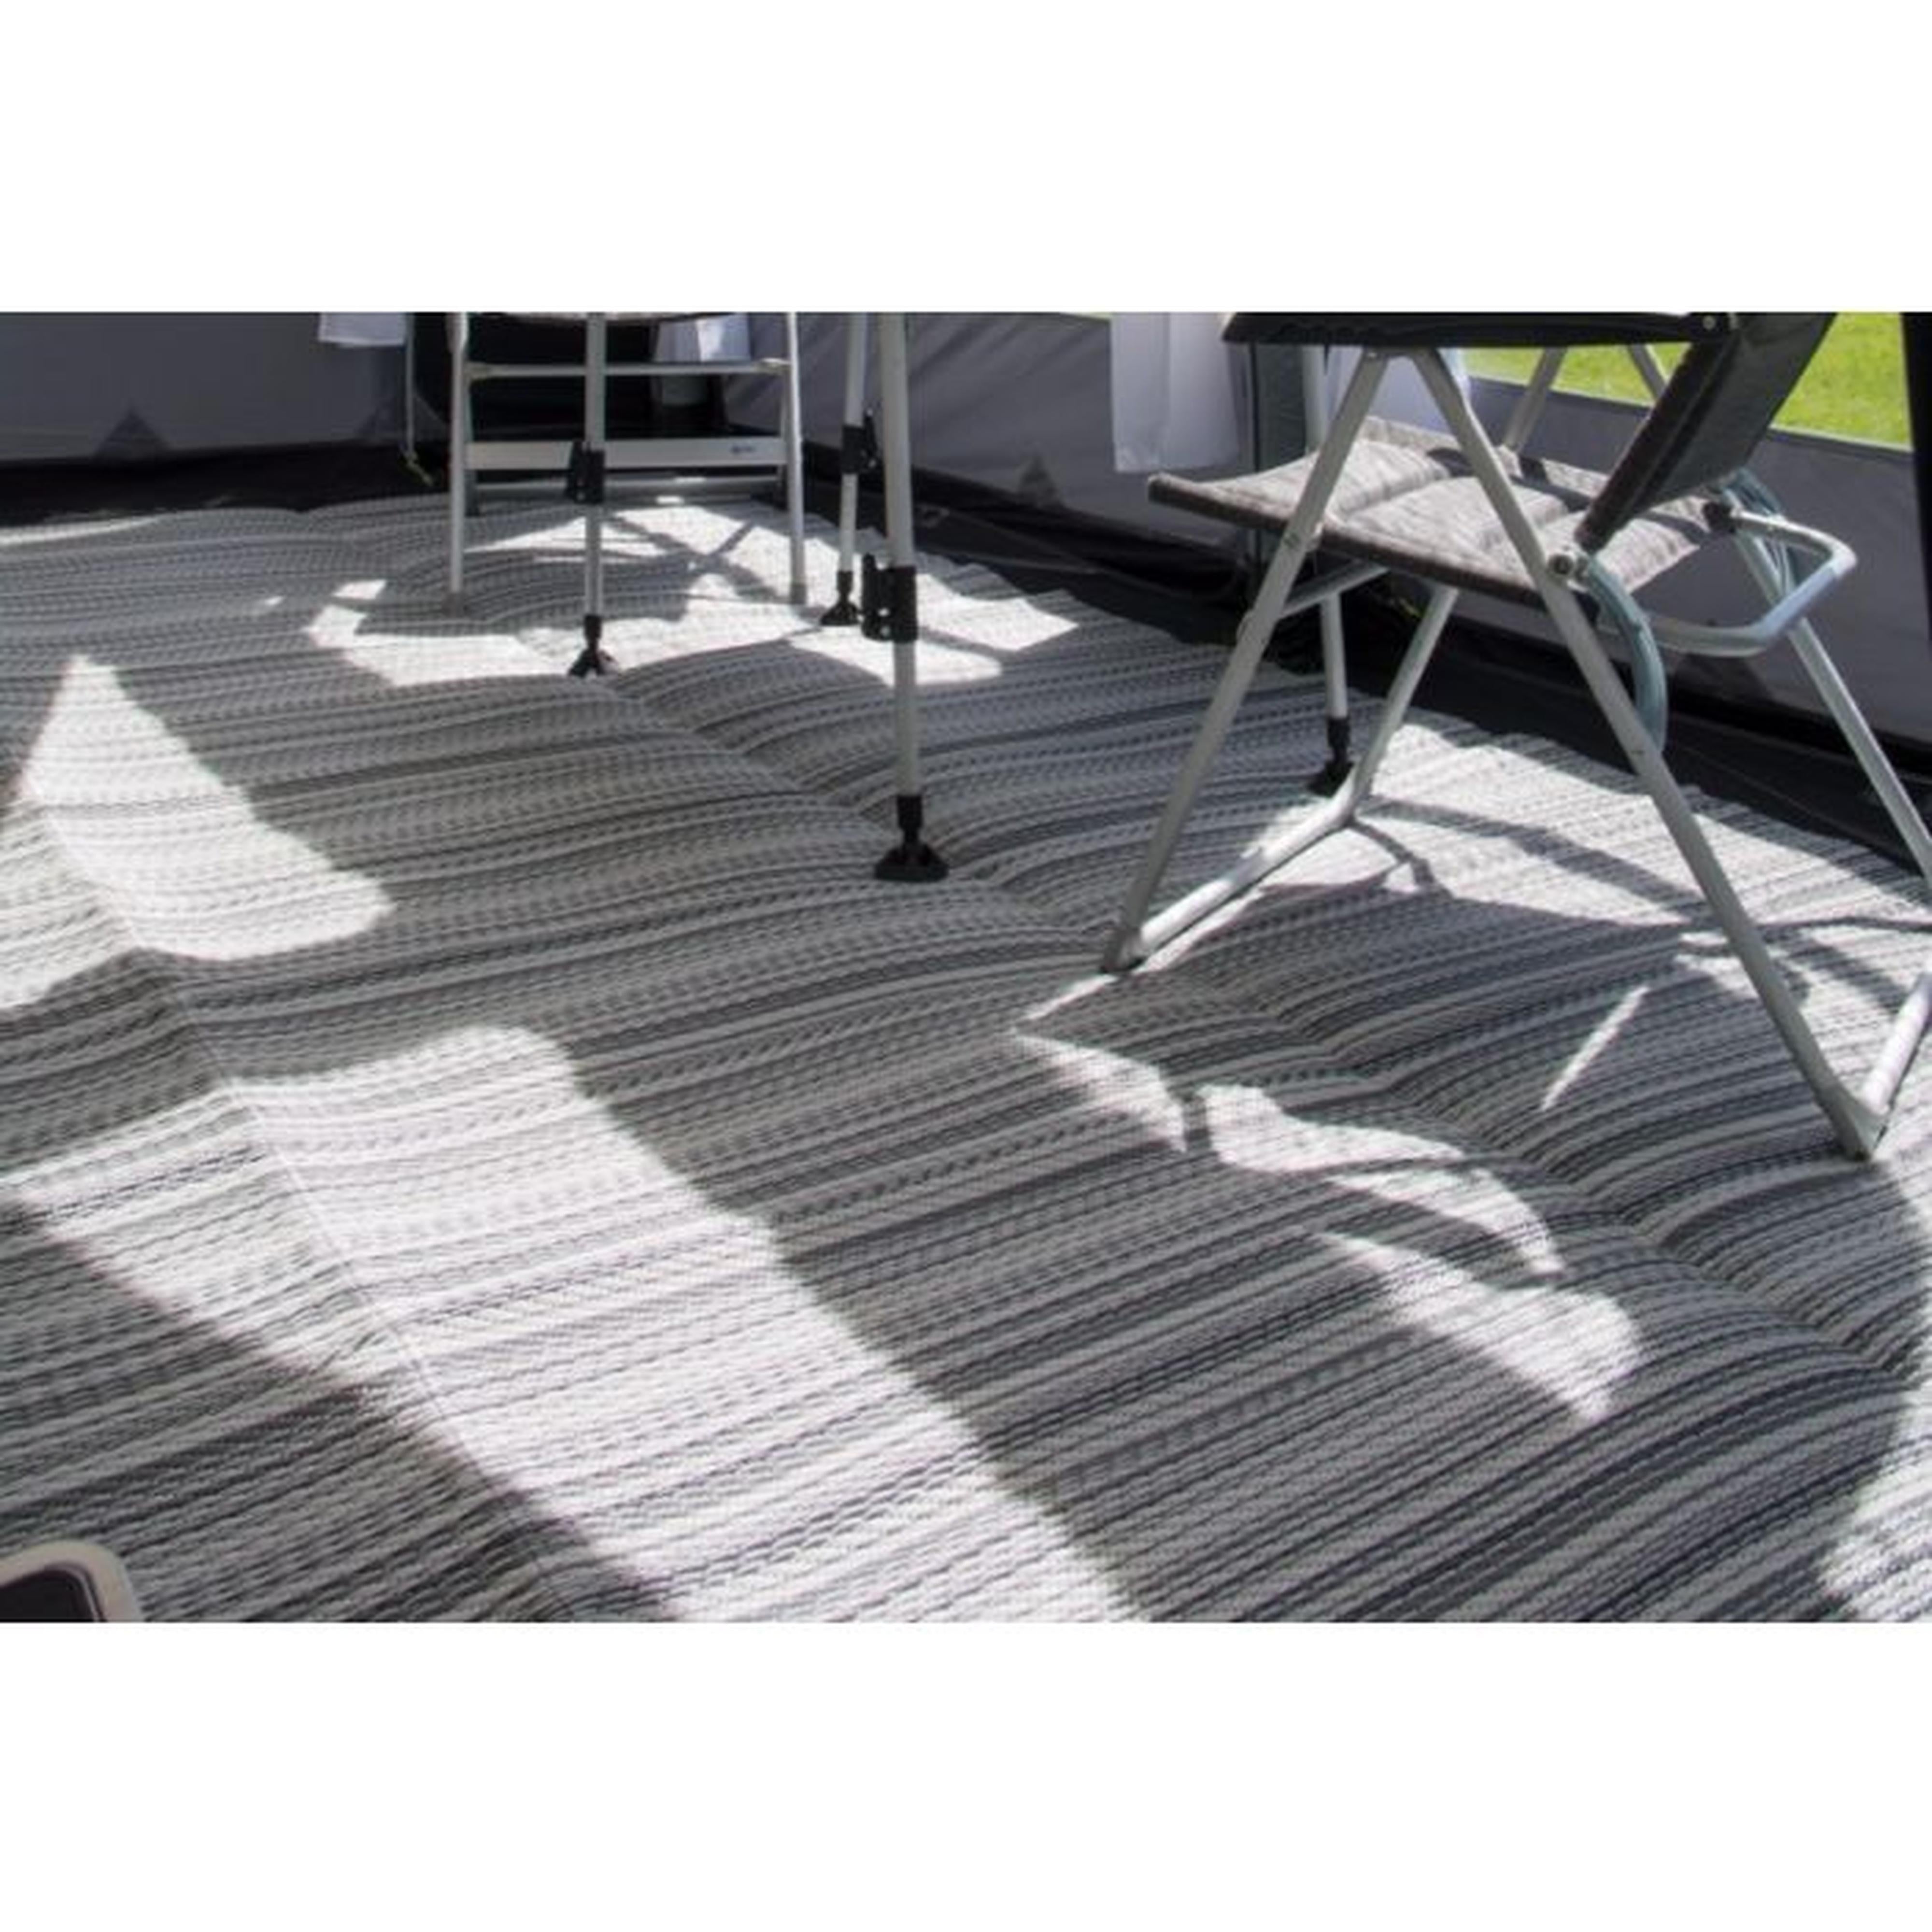 Dometic Continental Cushioned Awning Carpet 2.5m x 3.0m